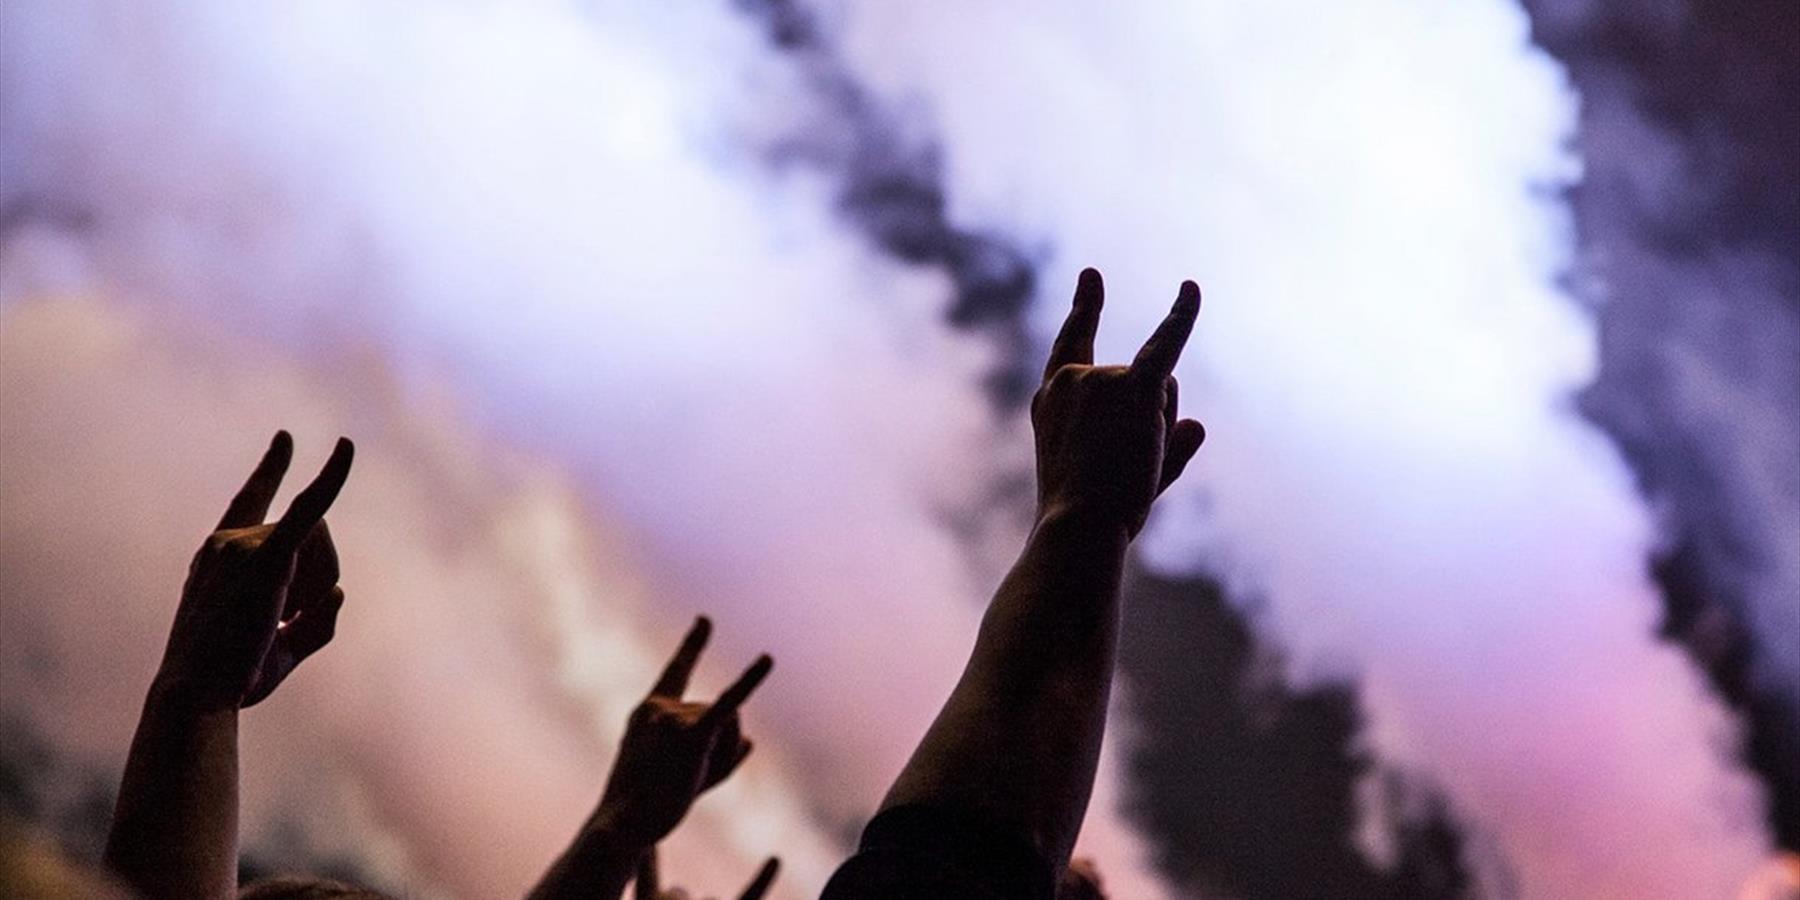 People at a concert making the sign of the horns hand gesture